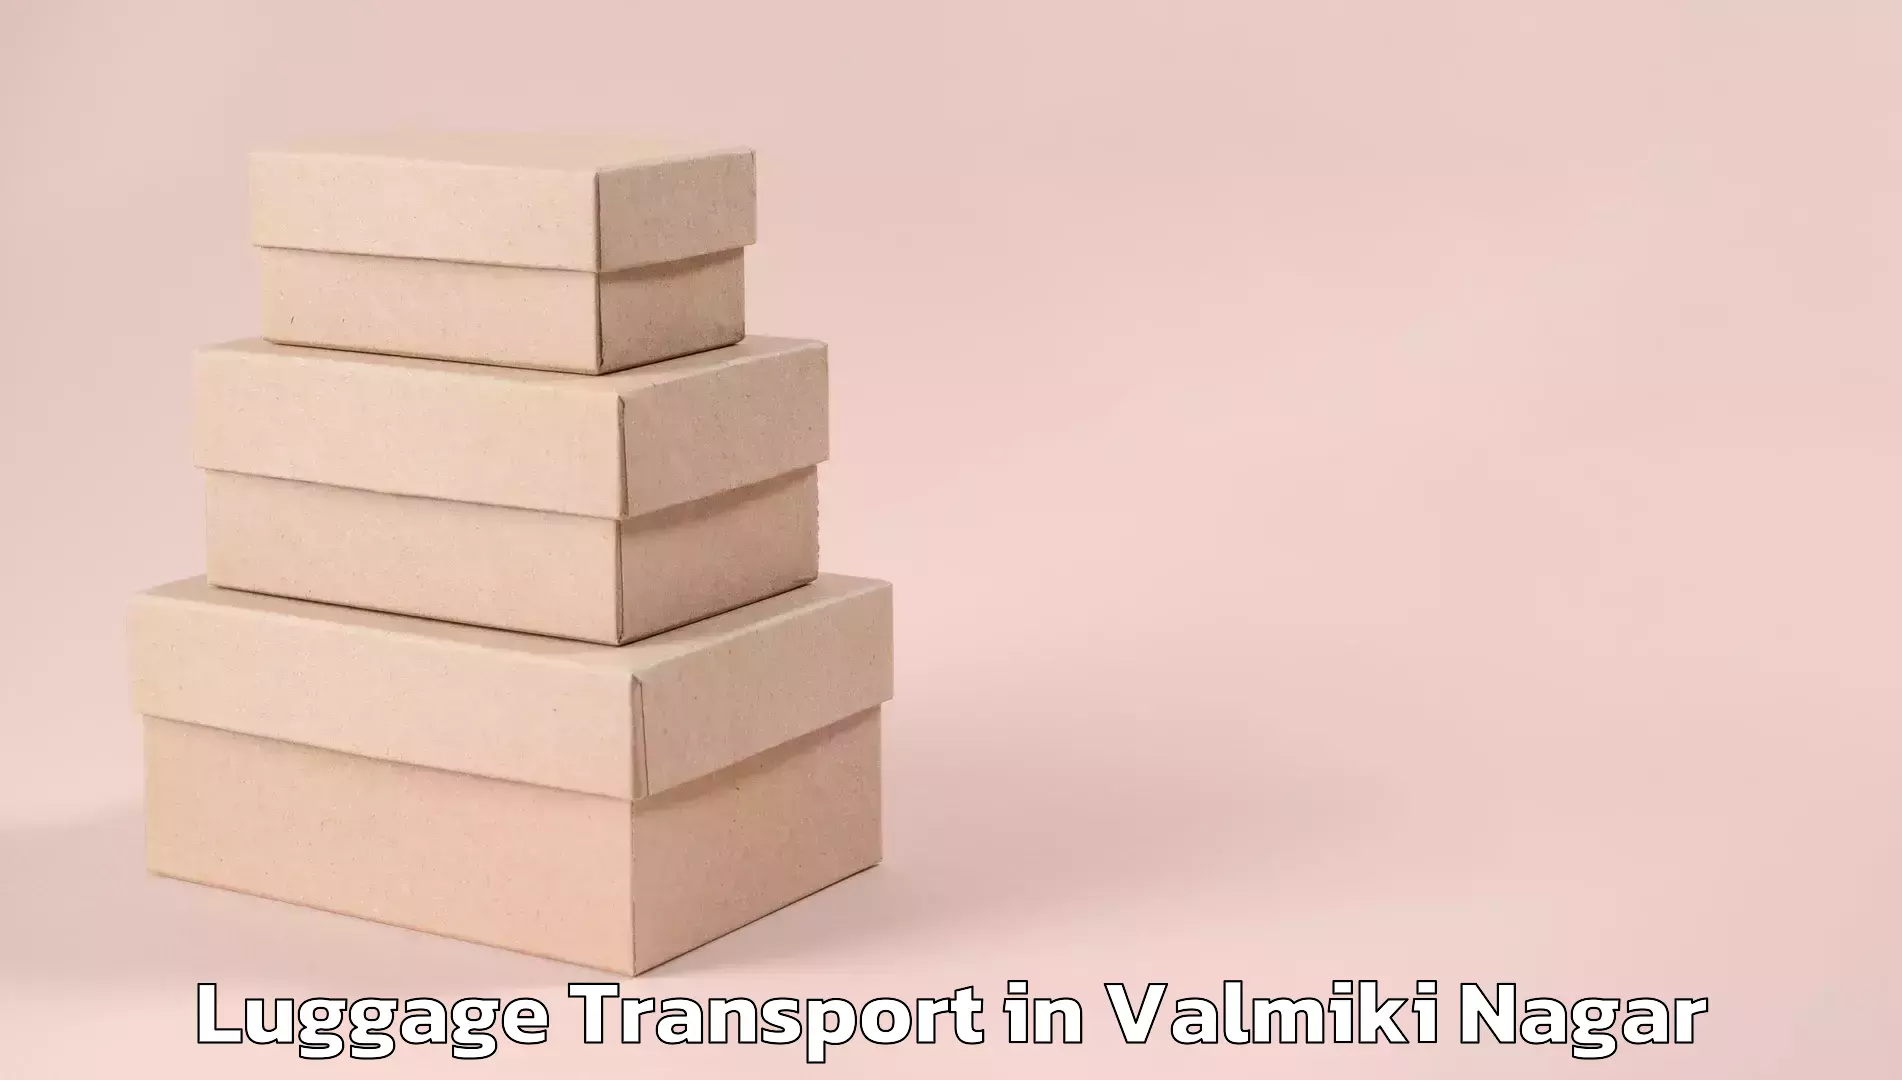 Luggage delivery system in Valmiki Nagar